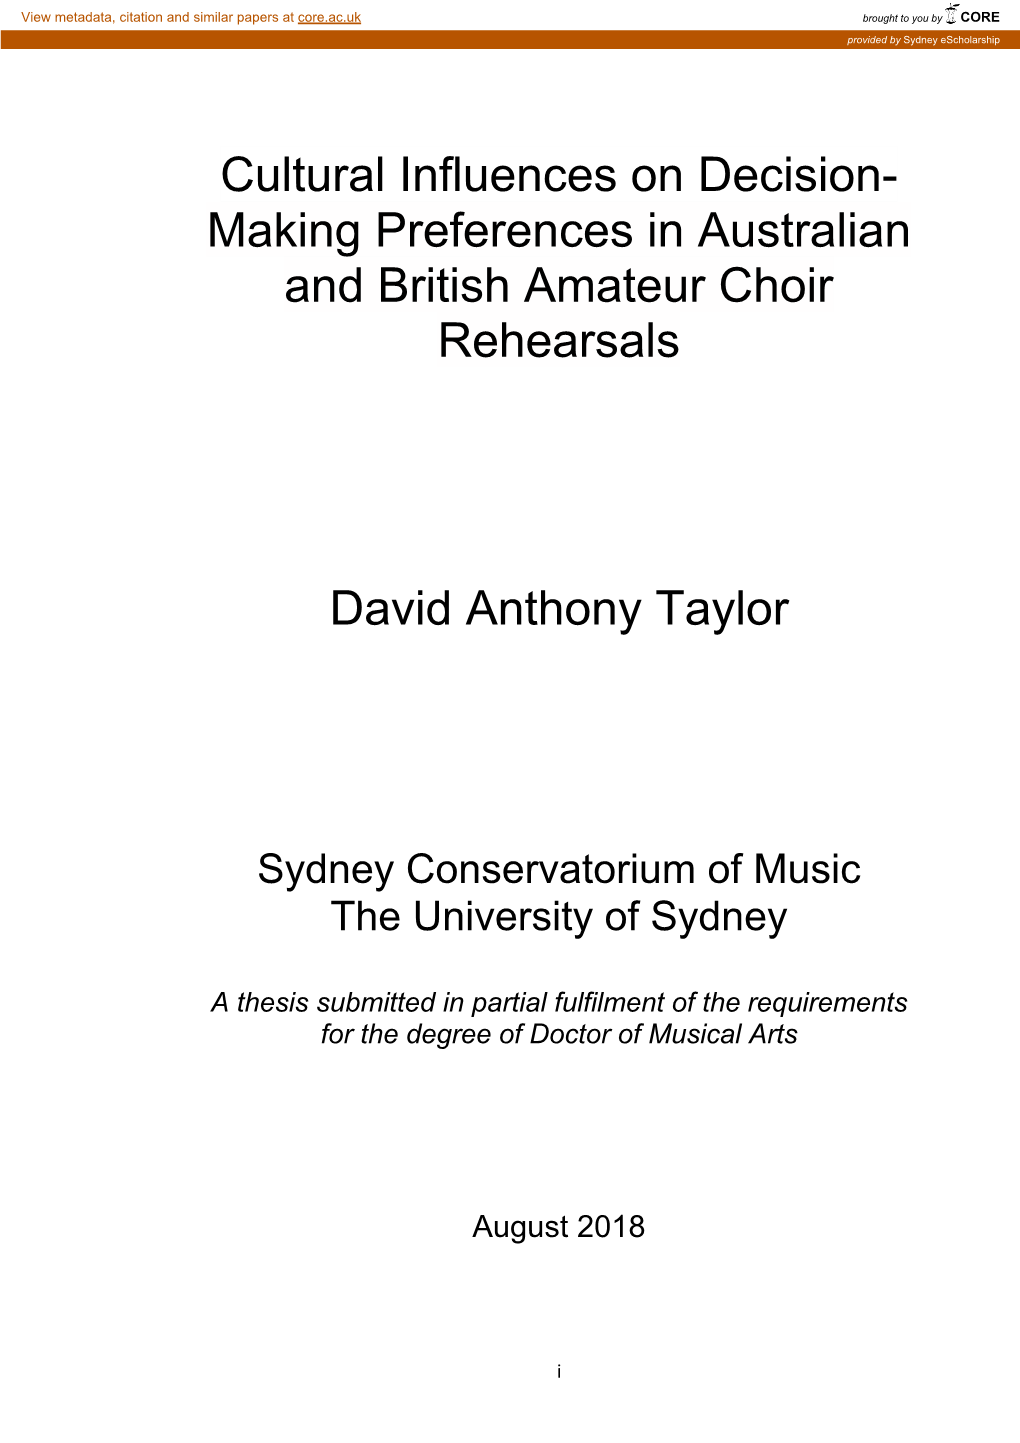 Cultural Influences on Decision- Making Preferences in Australian and British Amateur Choir Rehearsals David Anthony Taylor